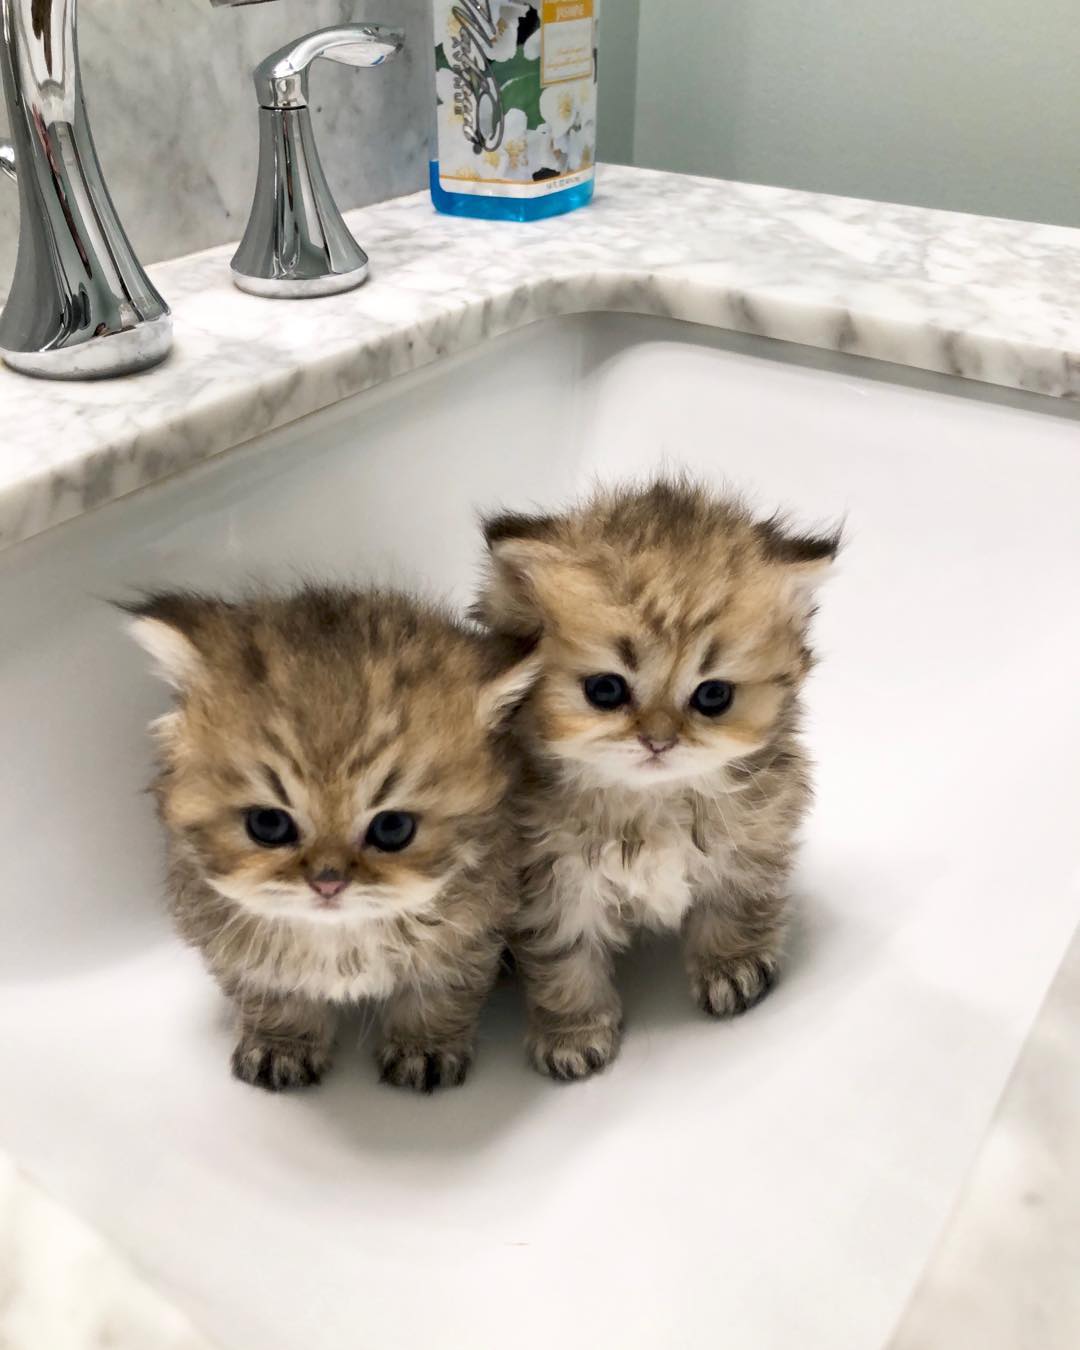 two Persian kittens sitting in a sink